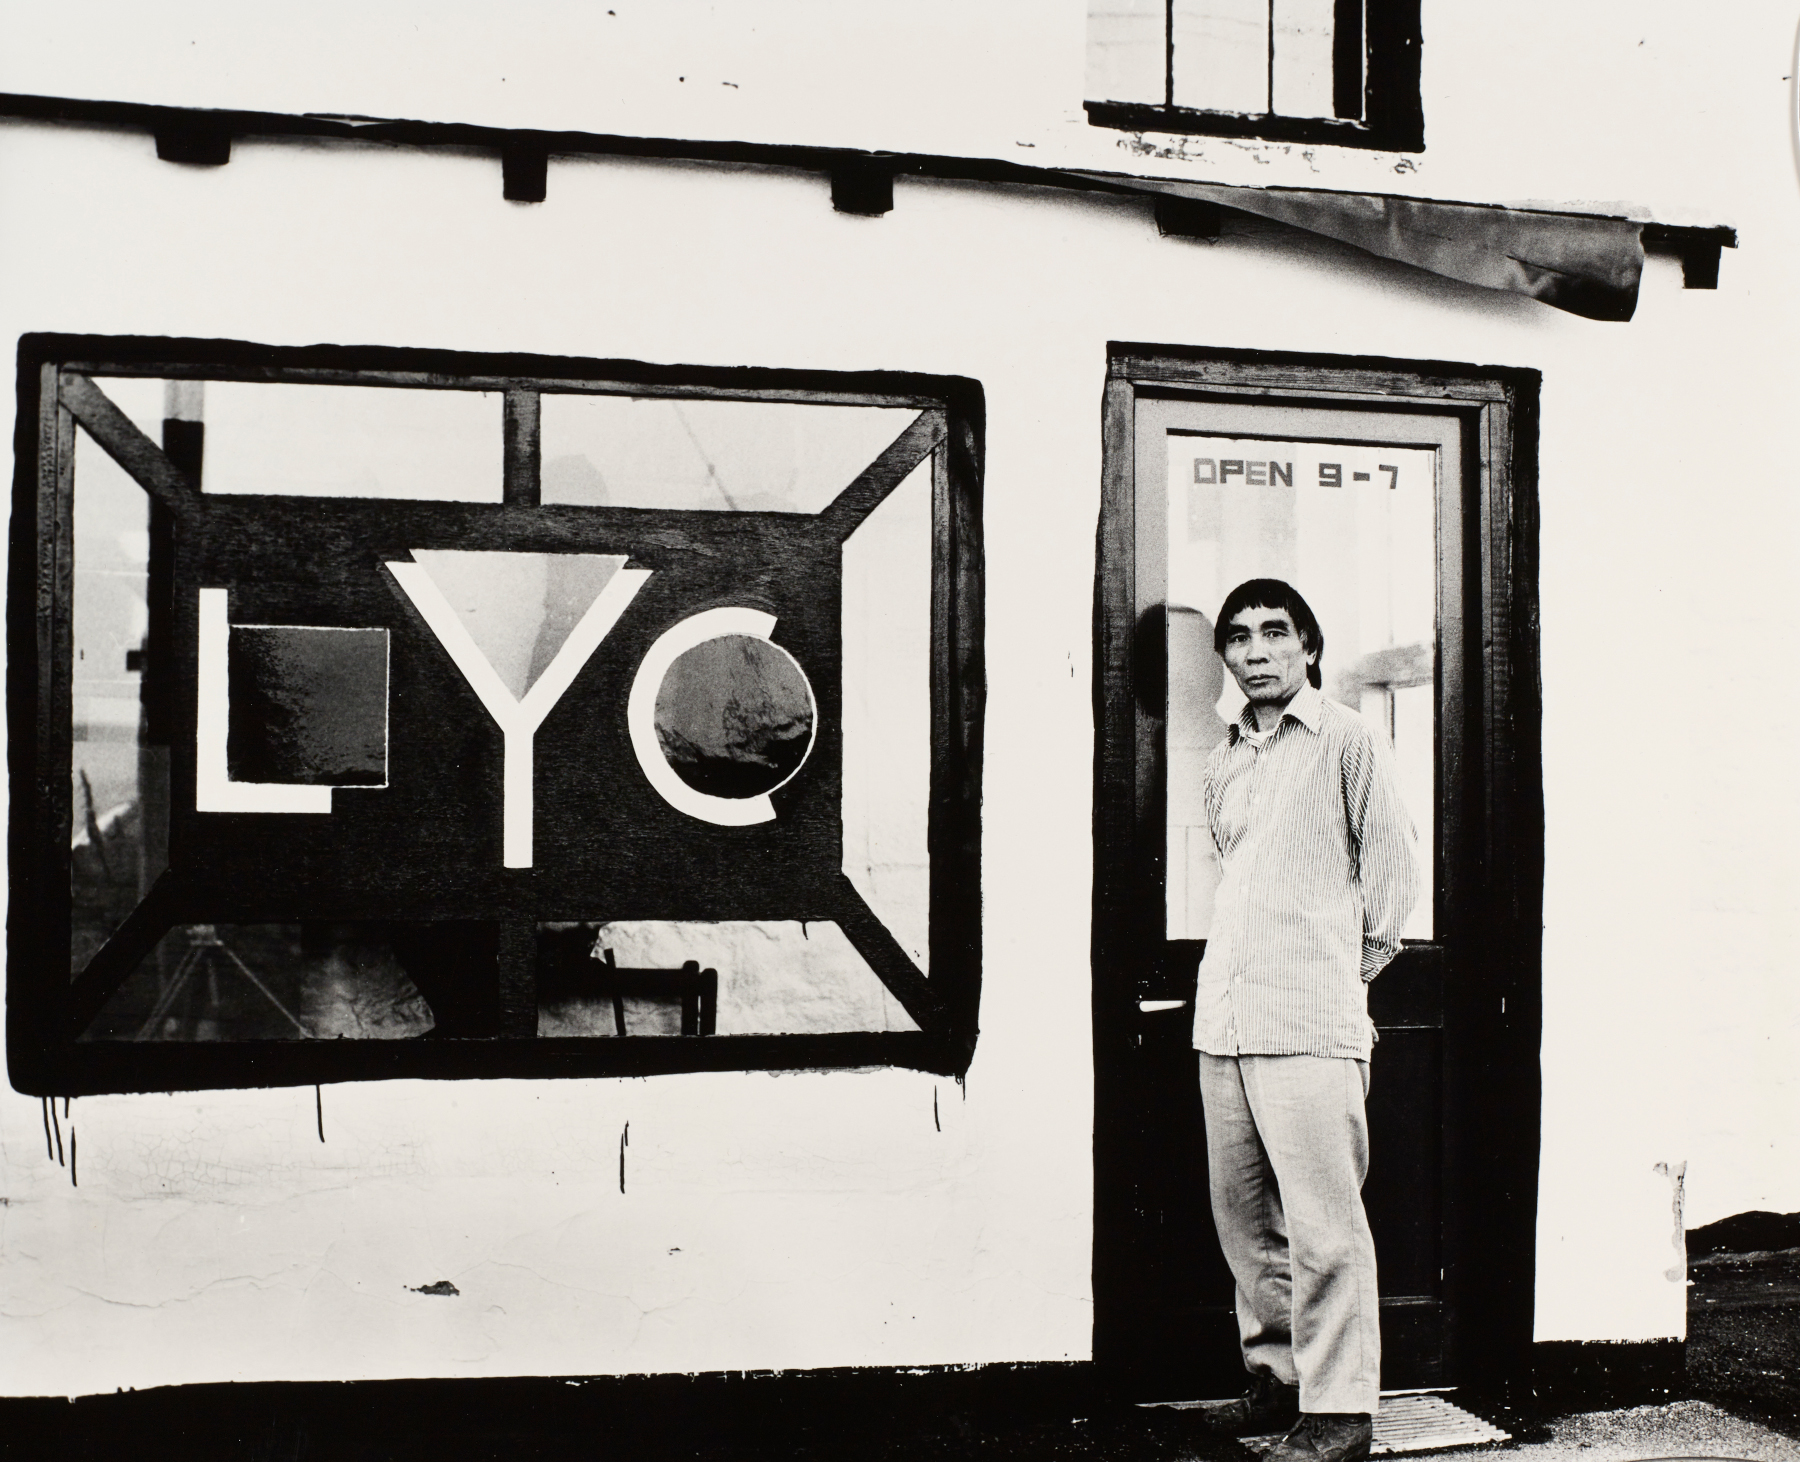 Li Yuan-chia standing at the porch of the LYC Museum & Art Gallery, featuring window designed by David Nash. Image courtesy of Li Yuan-chia Archive, The University of Manchester Library